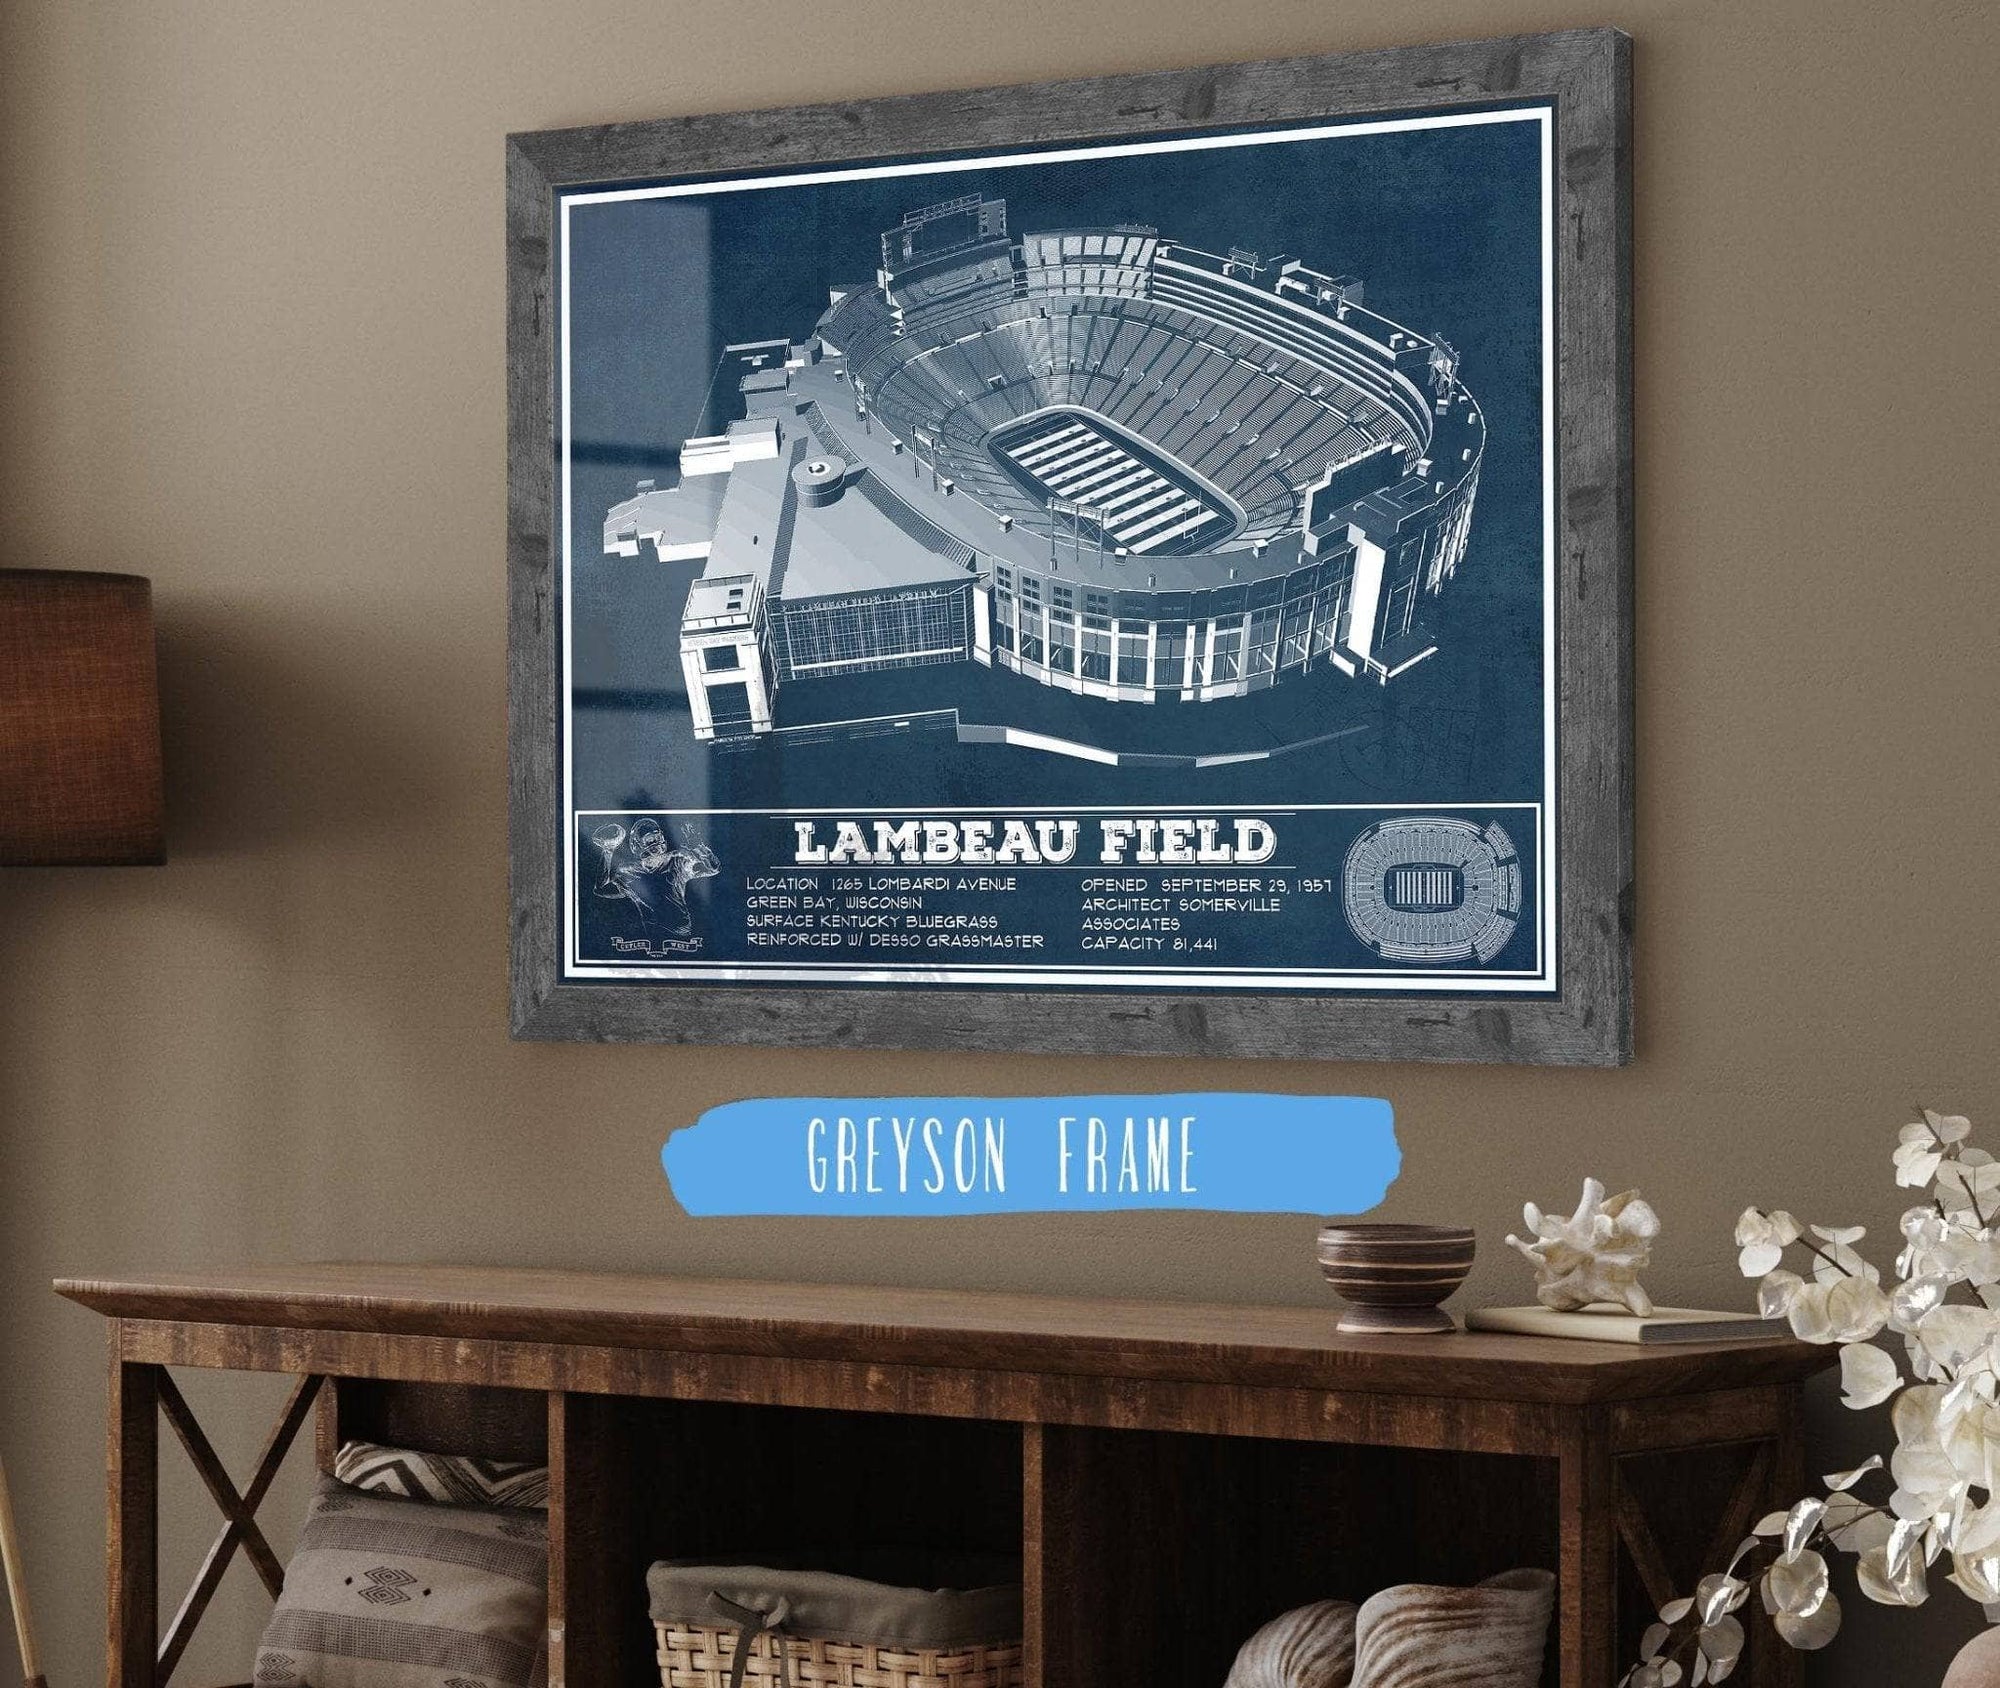 Cutler West Pro Football Collection 14" x 11" / Greyson Frame Green Bay Packers - Lambeau Field Vintage Football Print 698877220_66034